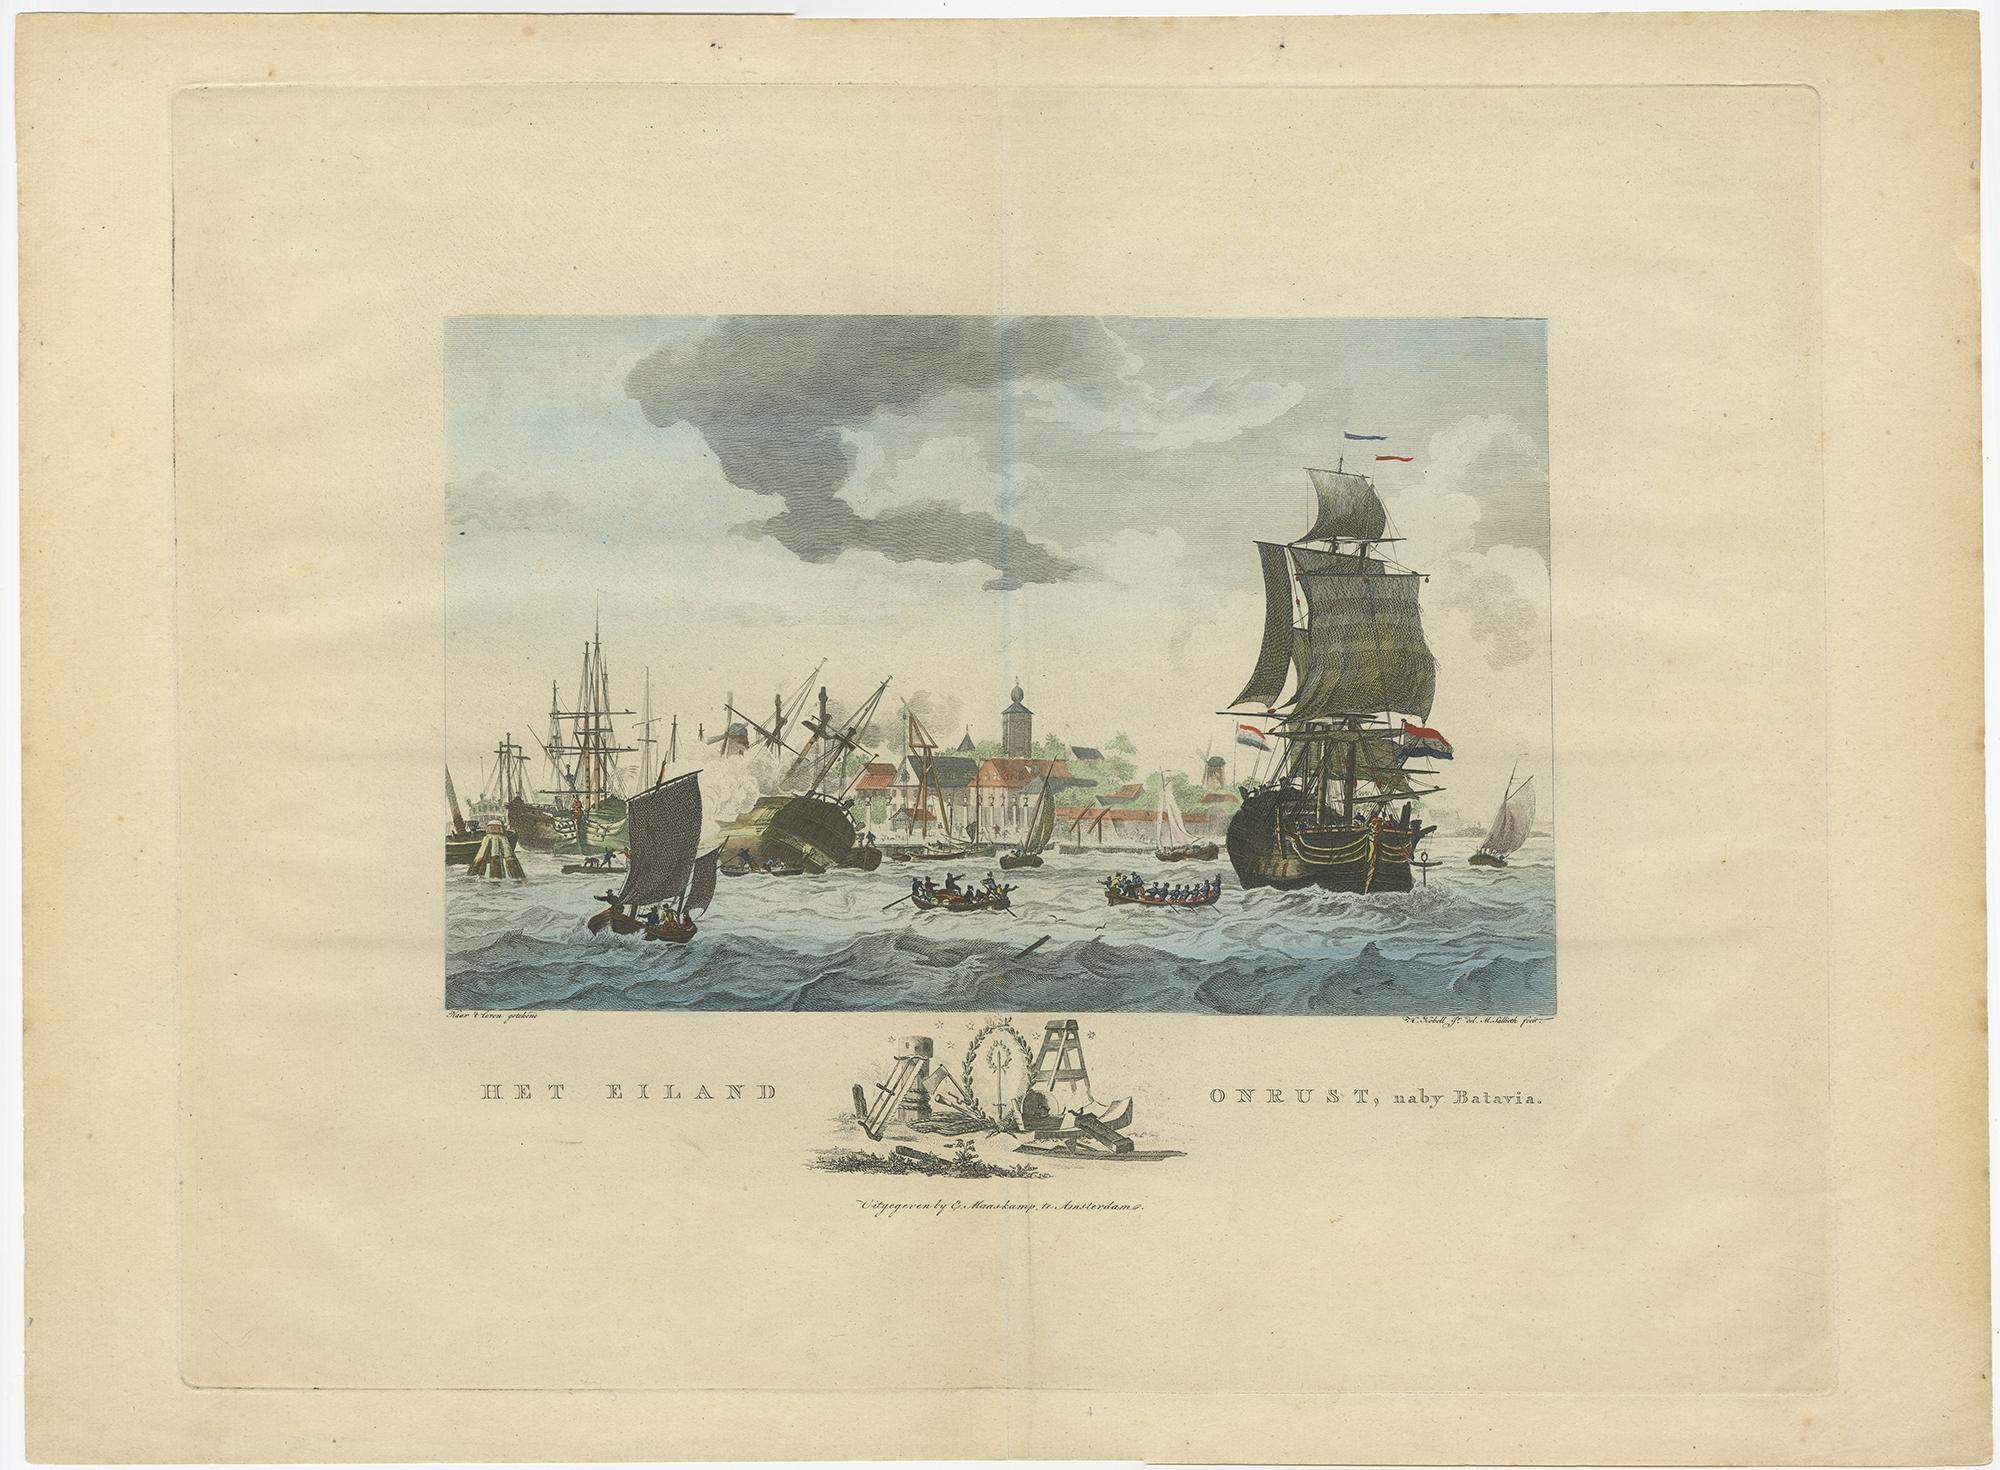 Antique print titled 'Het Eiland Onrust'. Beautiful view of the sea near Onrust Island, also known as Pulau Onrust or Pulau Kapal (ship island), Indonesia. Published by E. Maaskamp, circa 1805.

Artists and Engravers: Engraved by M. Sallieth after